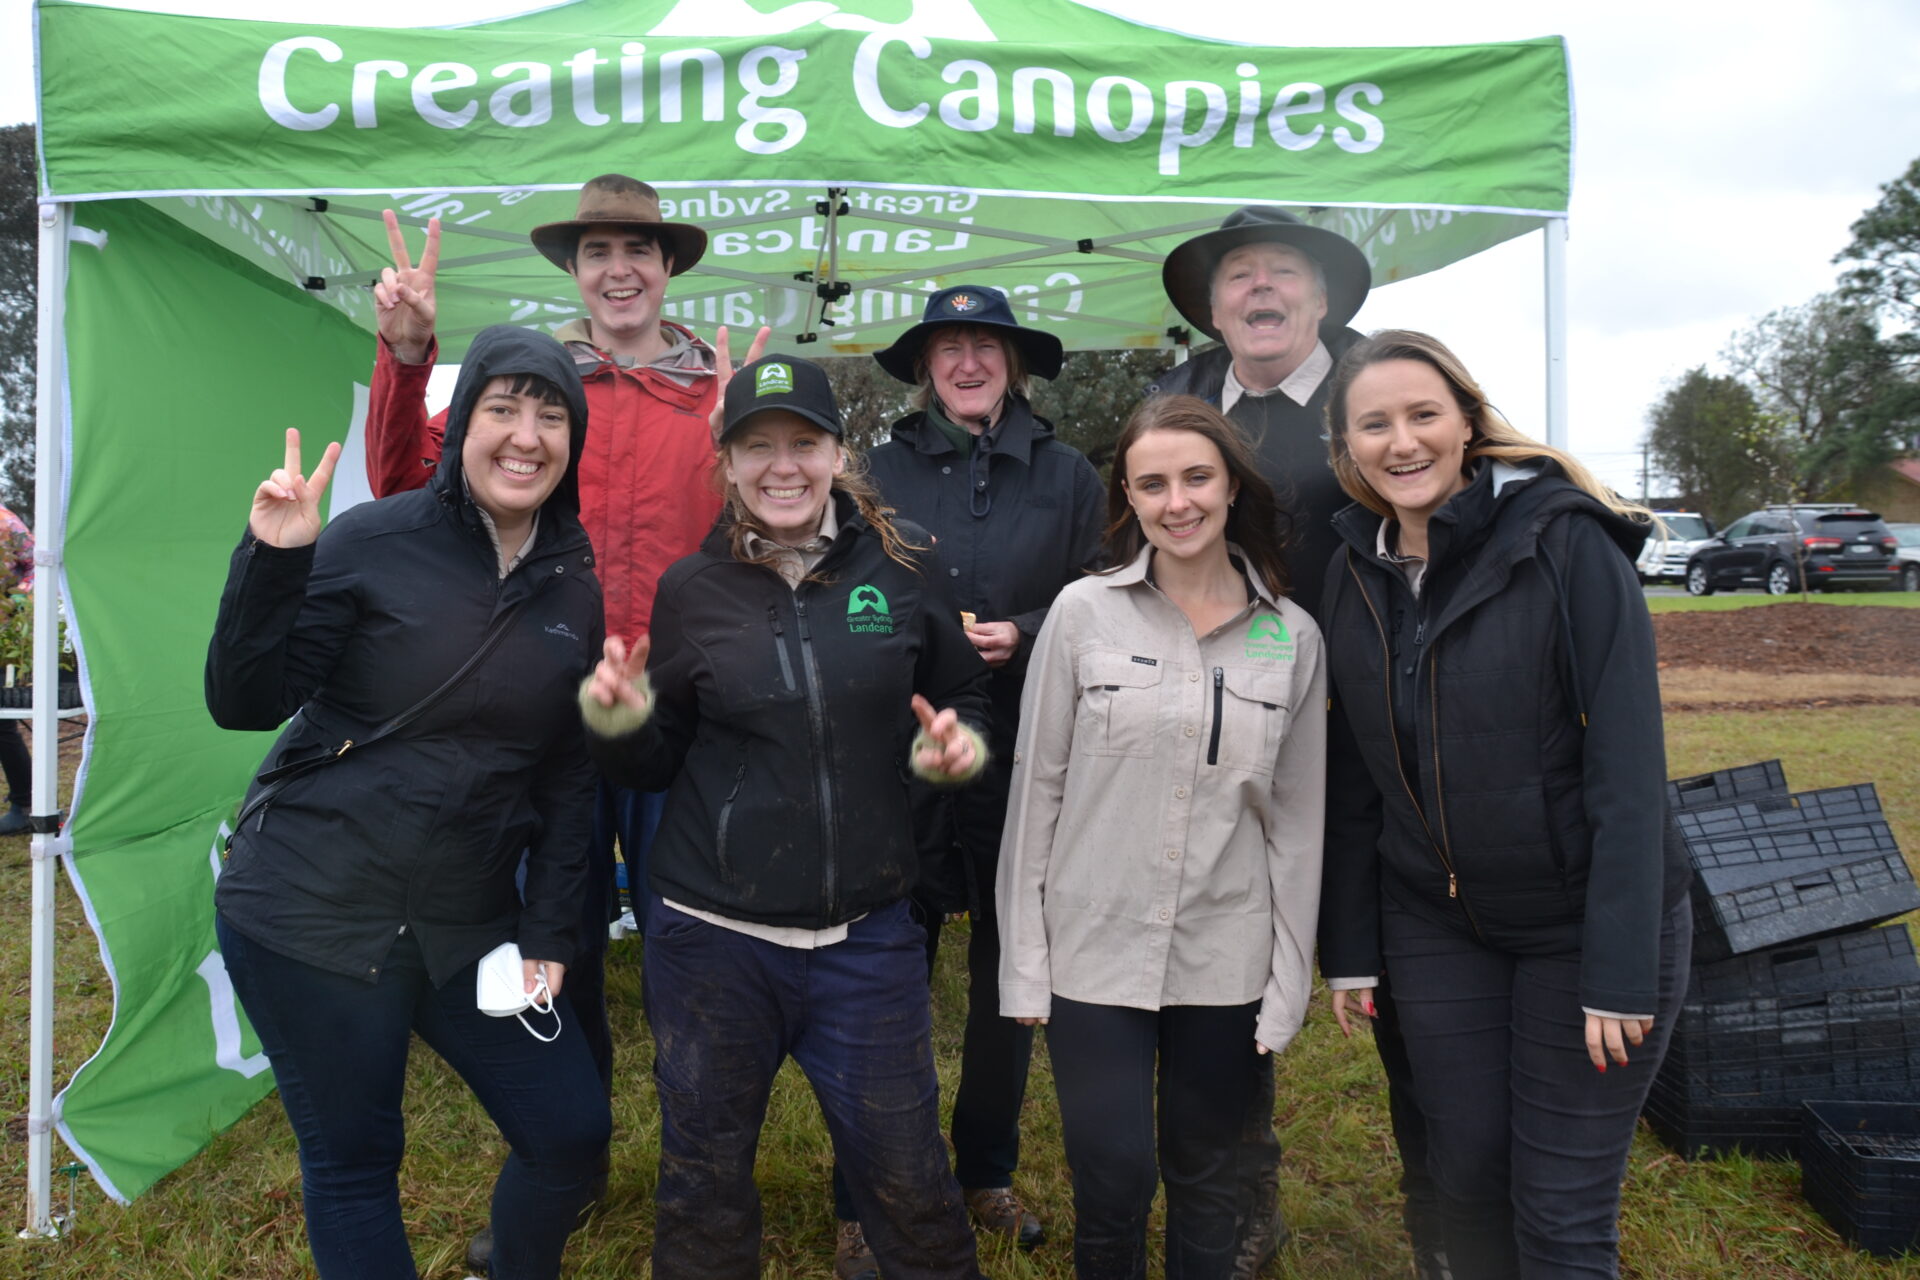 Creating Canopies hits their goal – 100,000 trees!